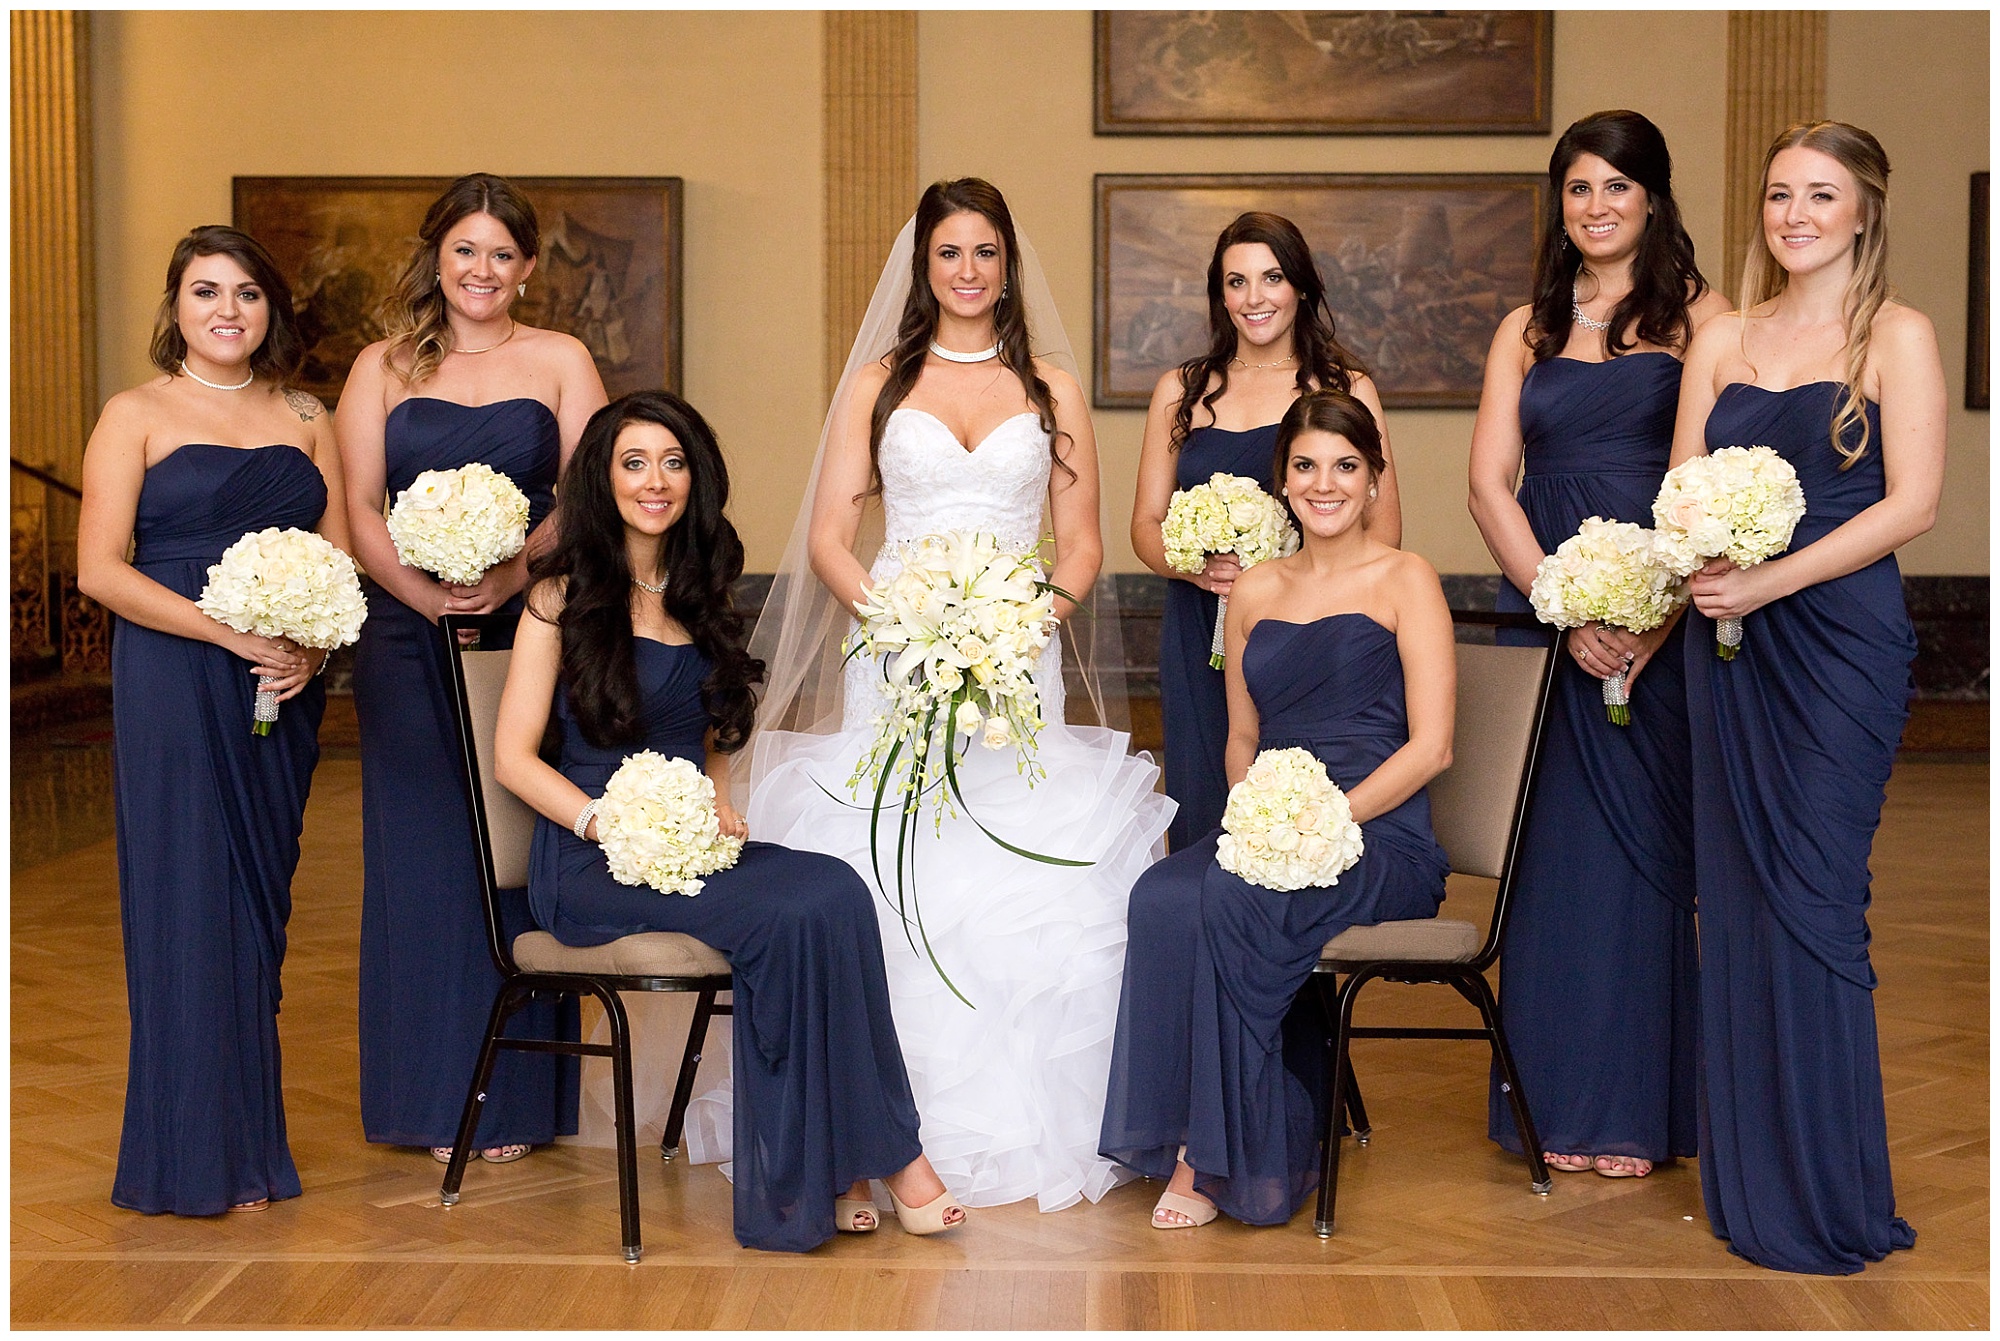 Photo of the bride and her ladies in a group portrait.